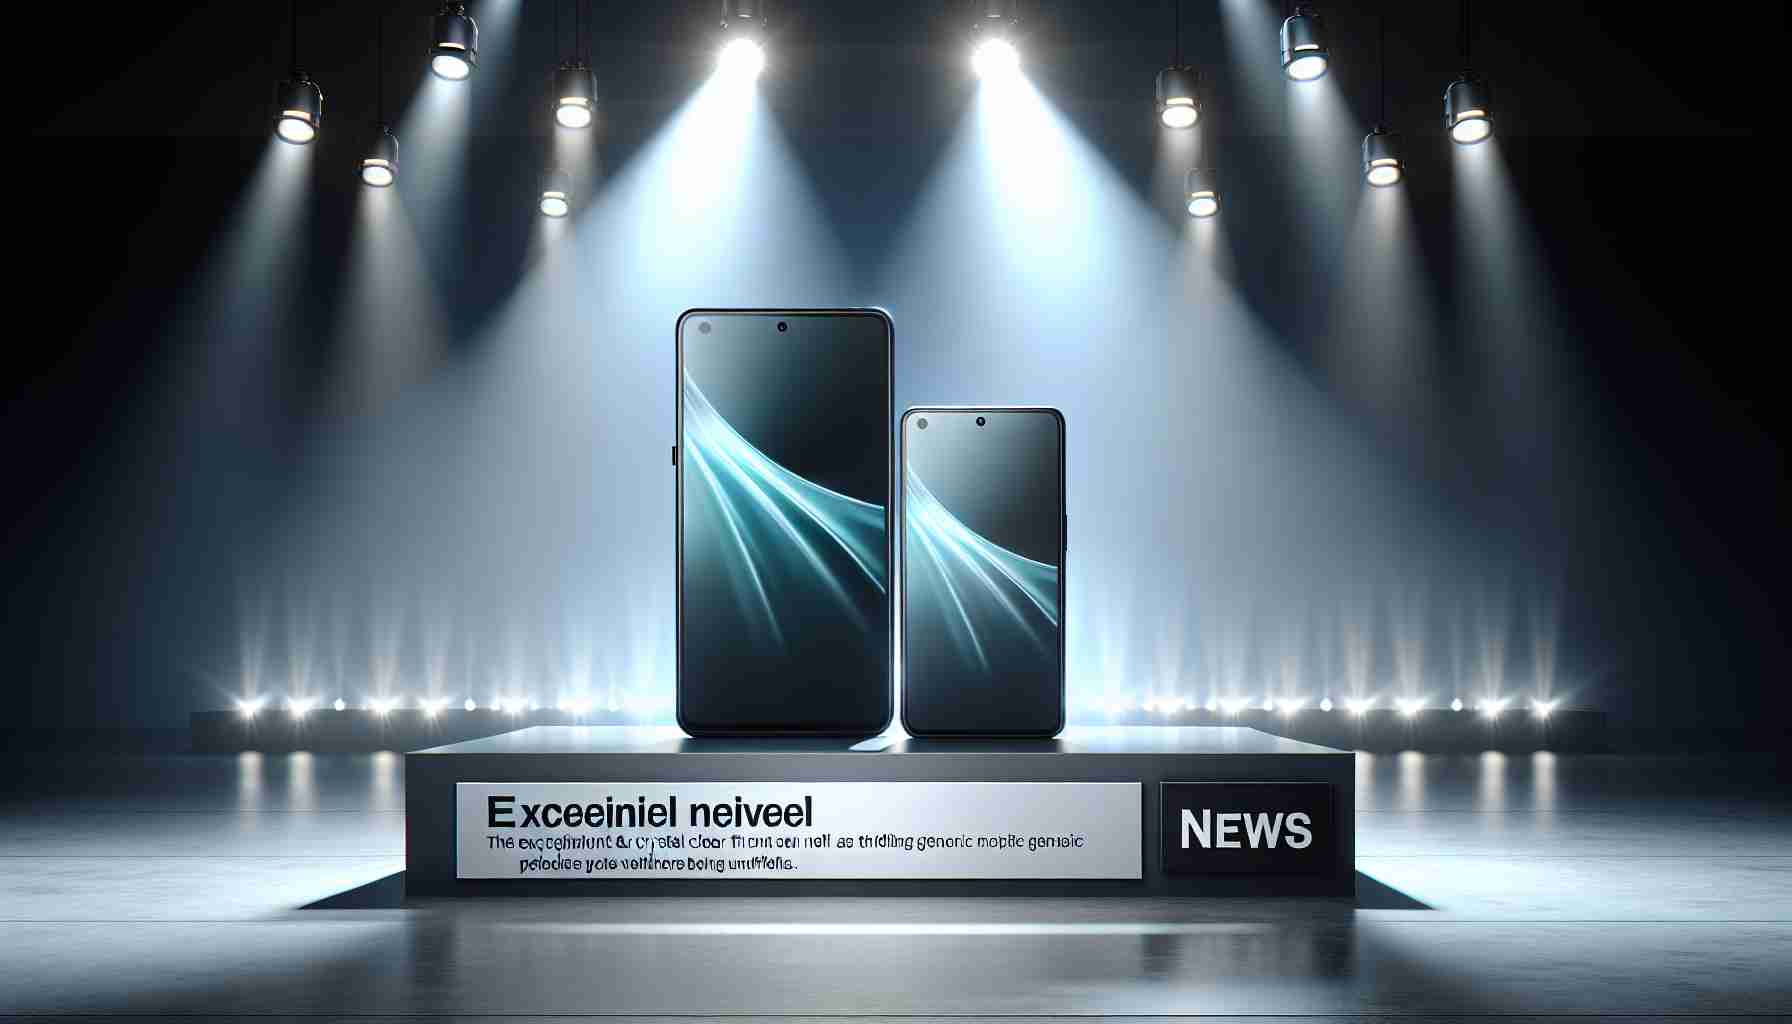 Samsung Announces Launch of Two Exciting New Smartphones